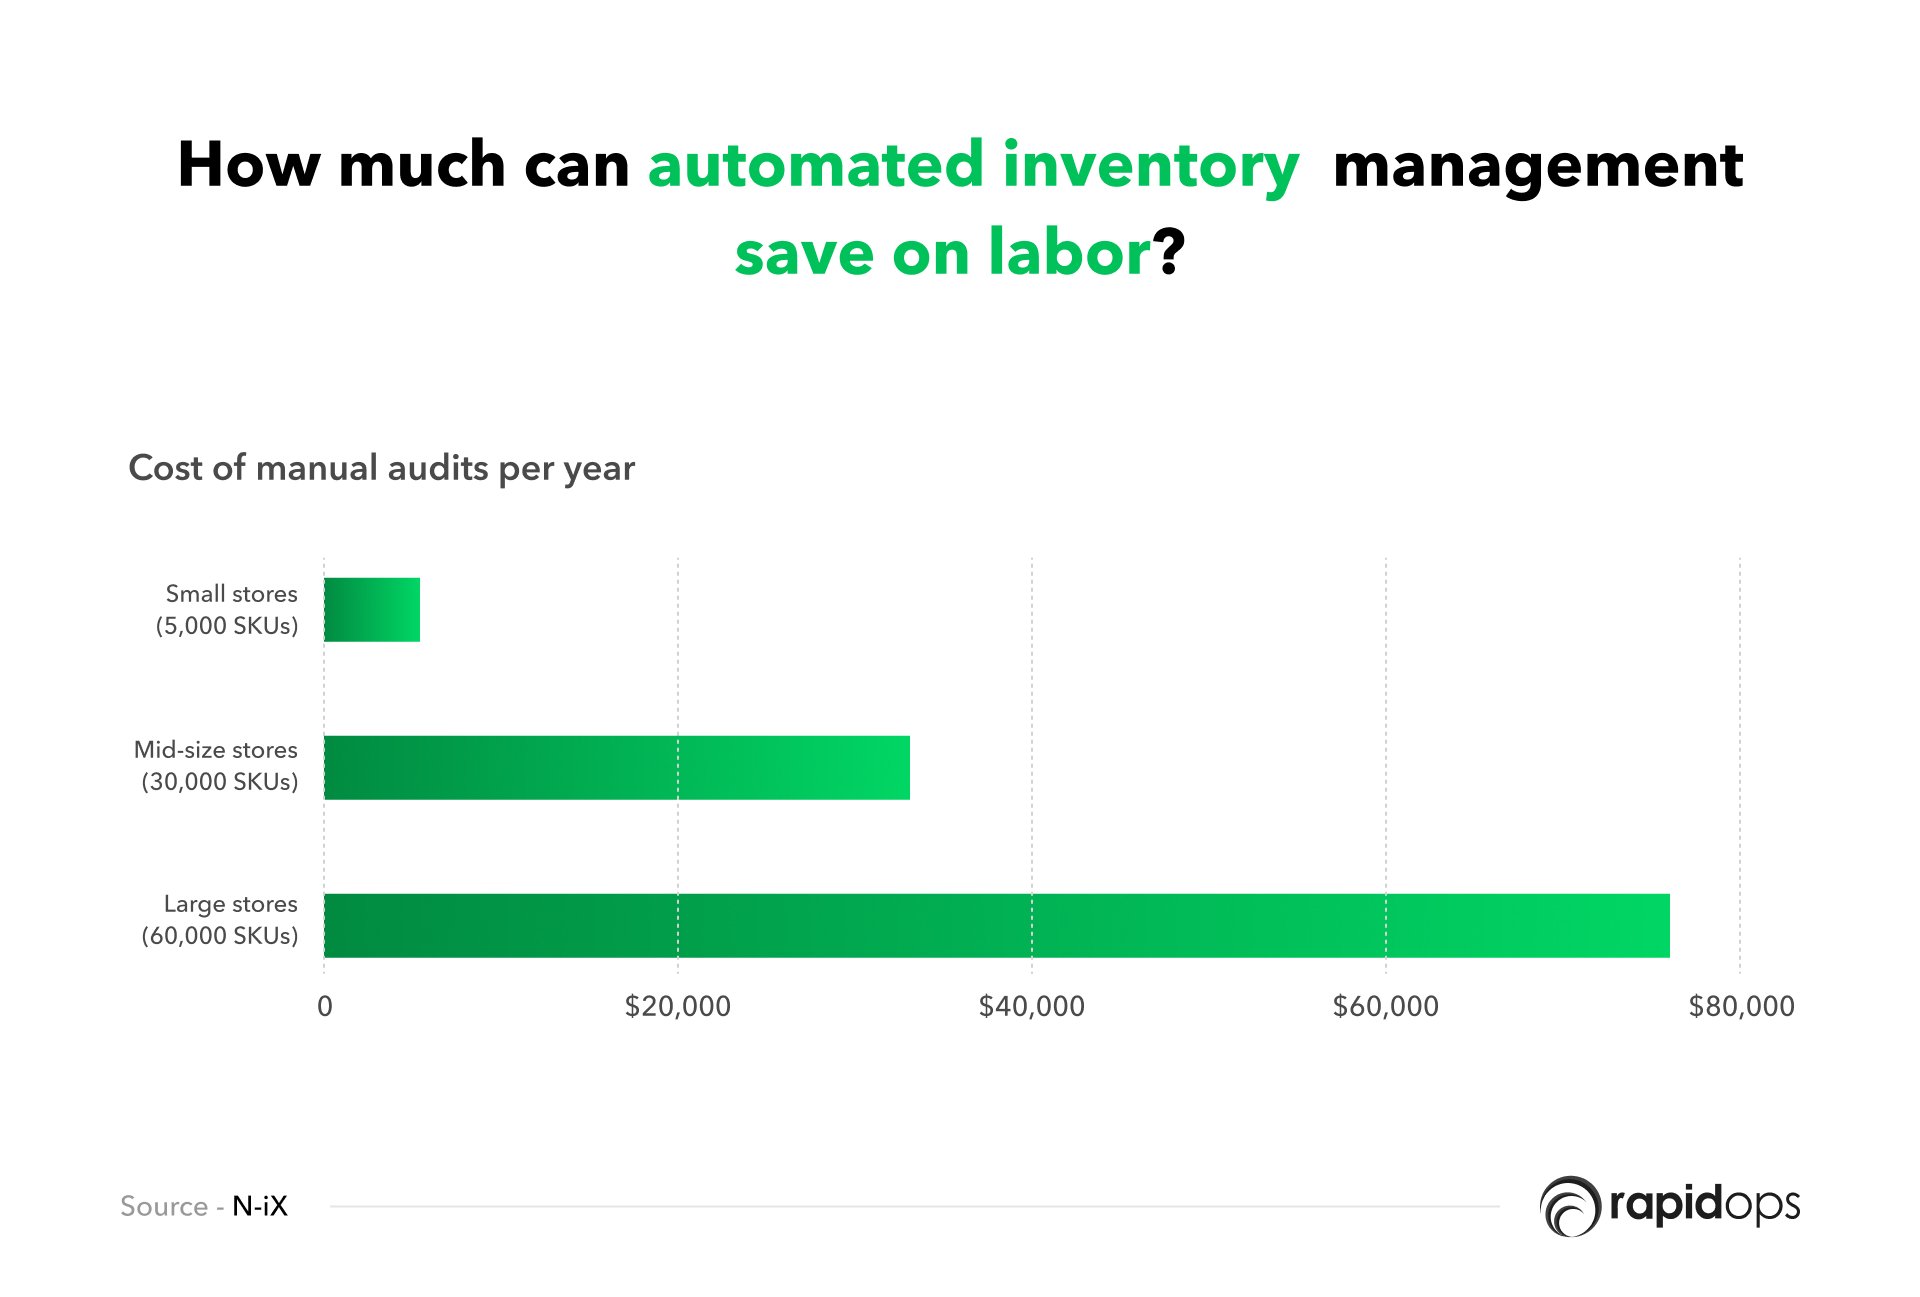 Automated inventory management